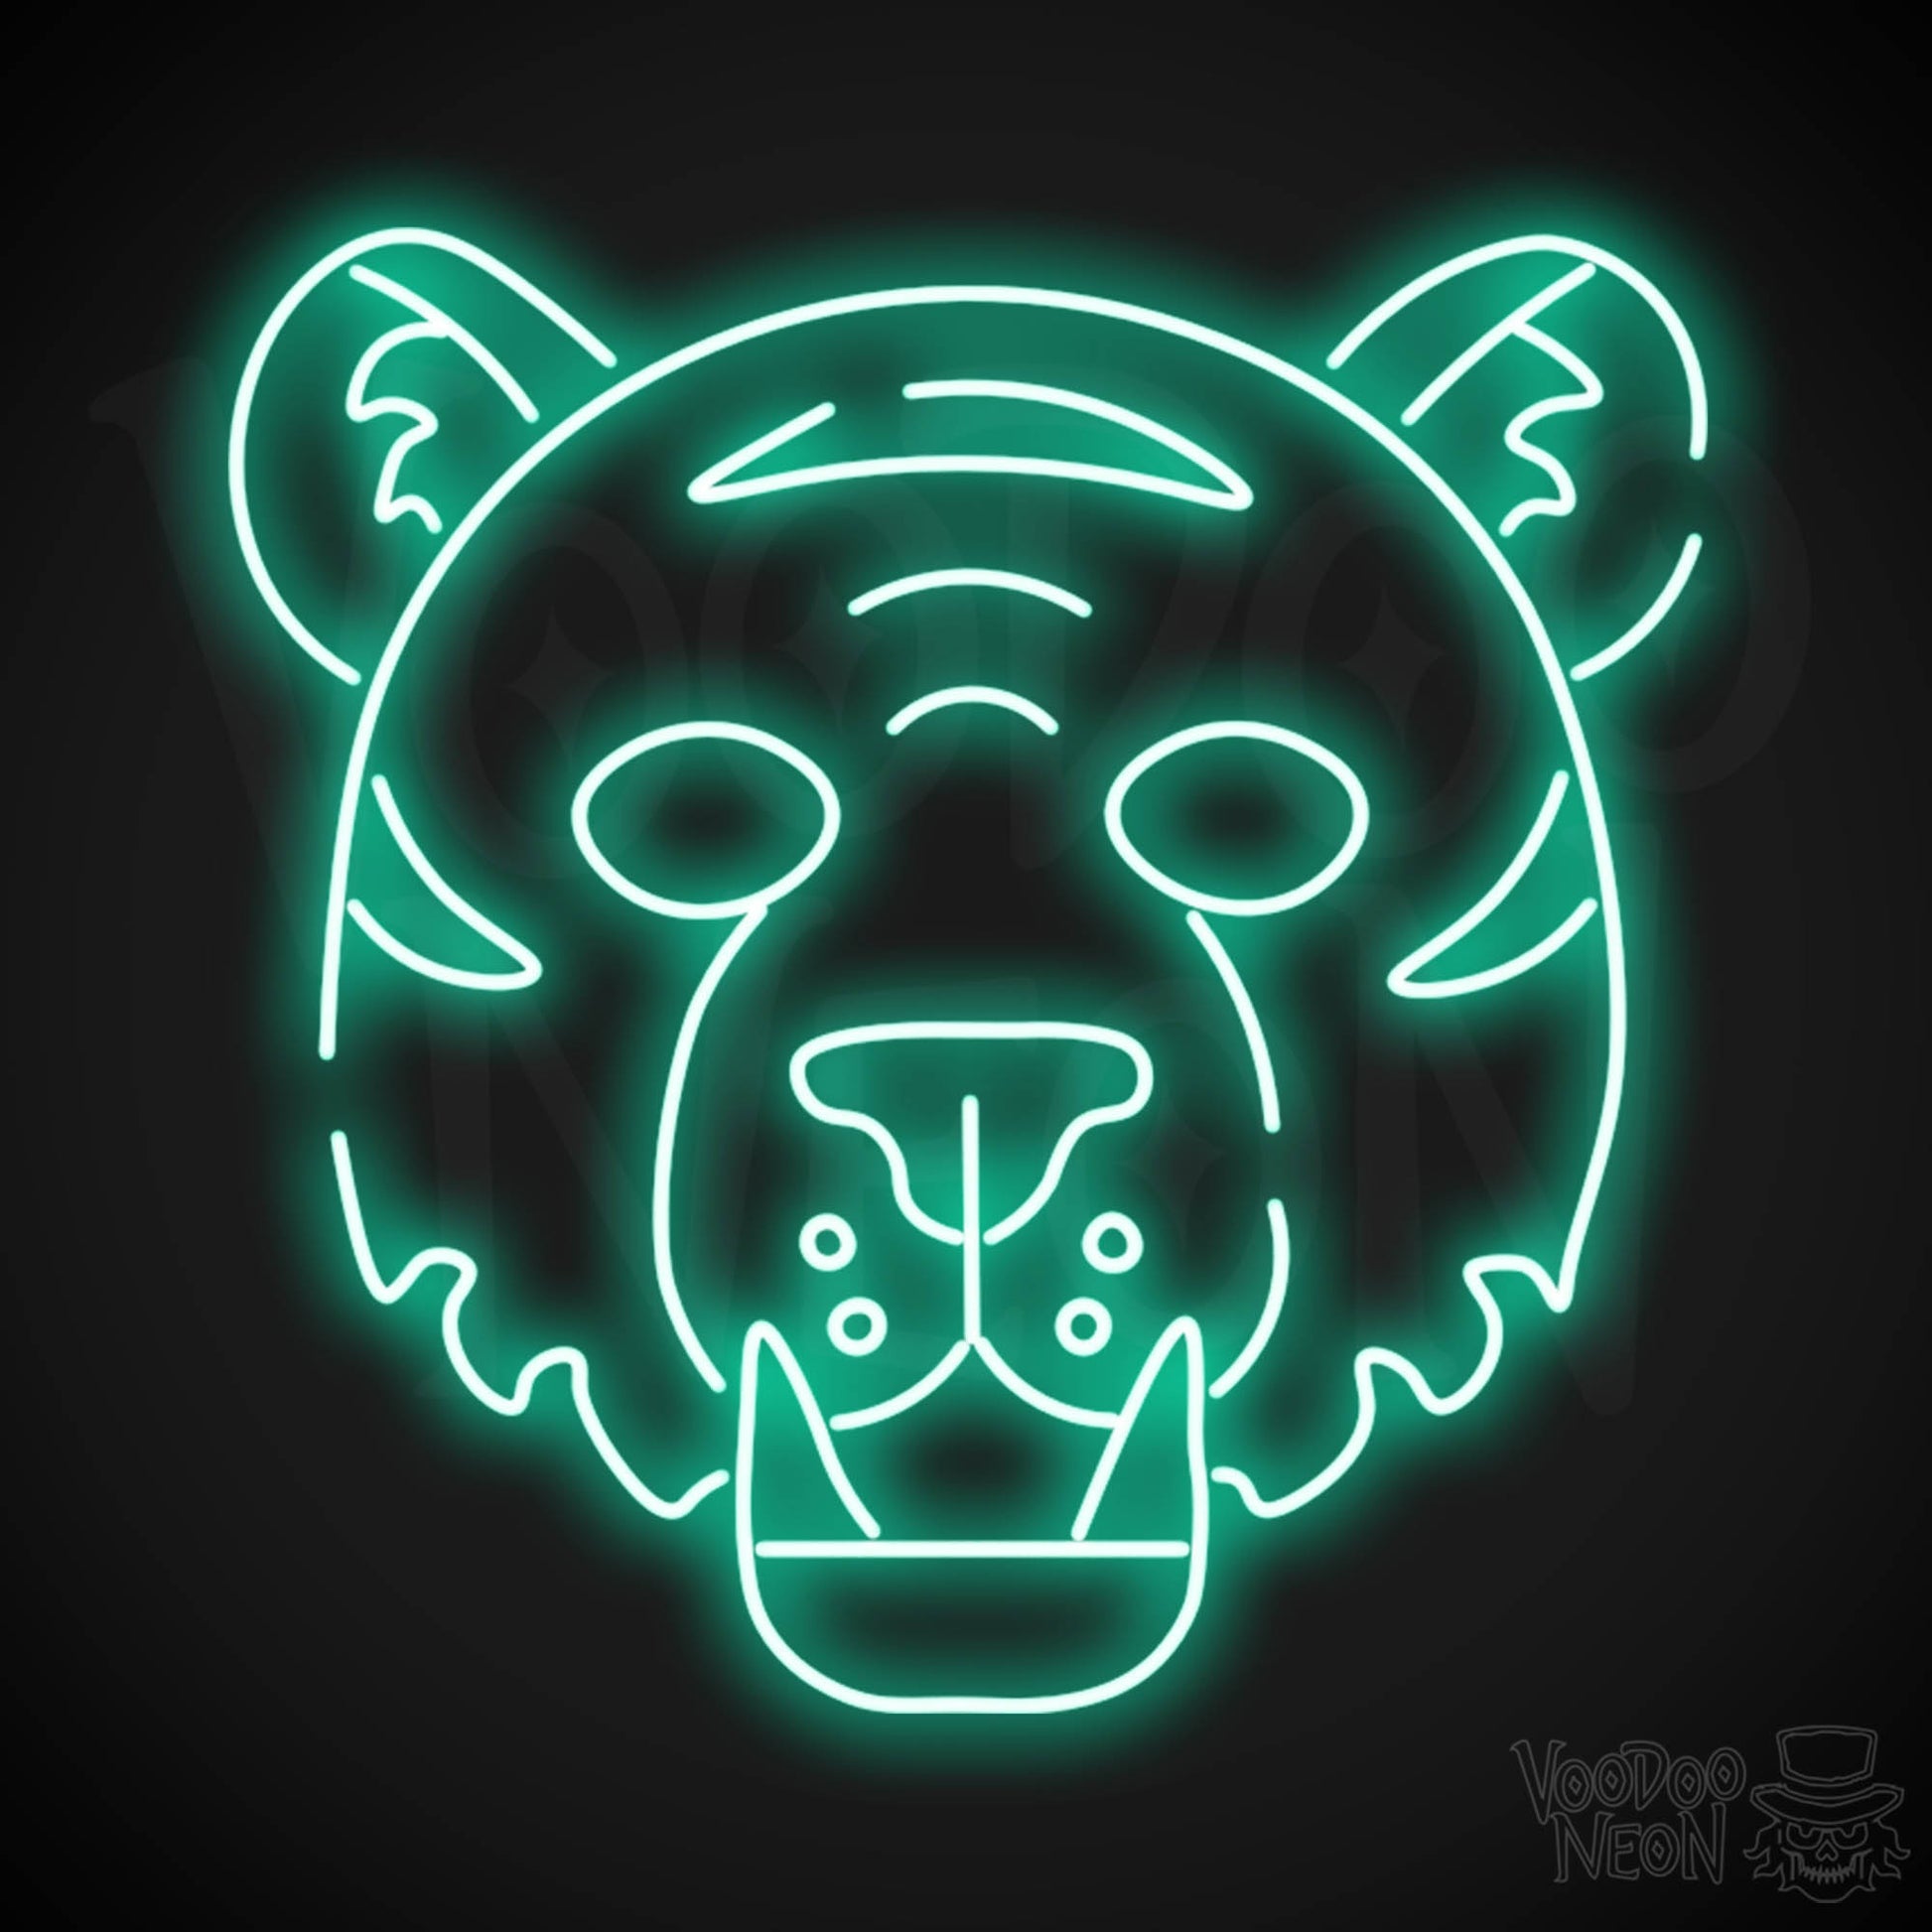 Neon Tiger Wall Art - Neon Tiger Sign - Tiger Neon Sign - LED Sign - Color Light Green